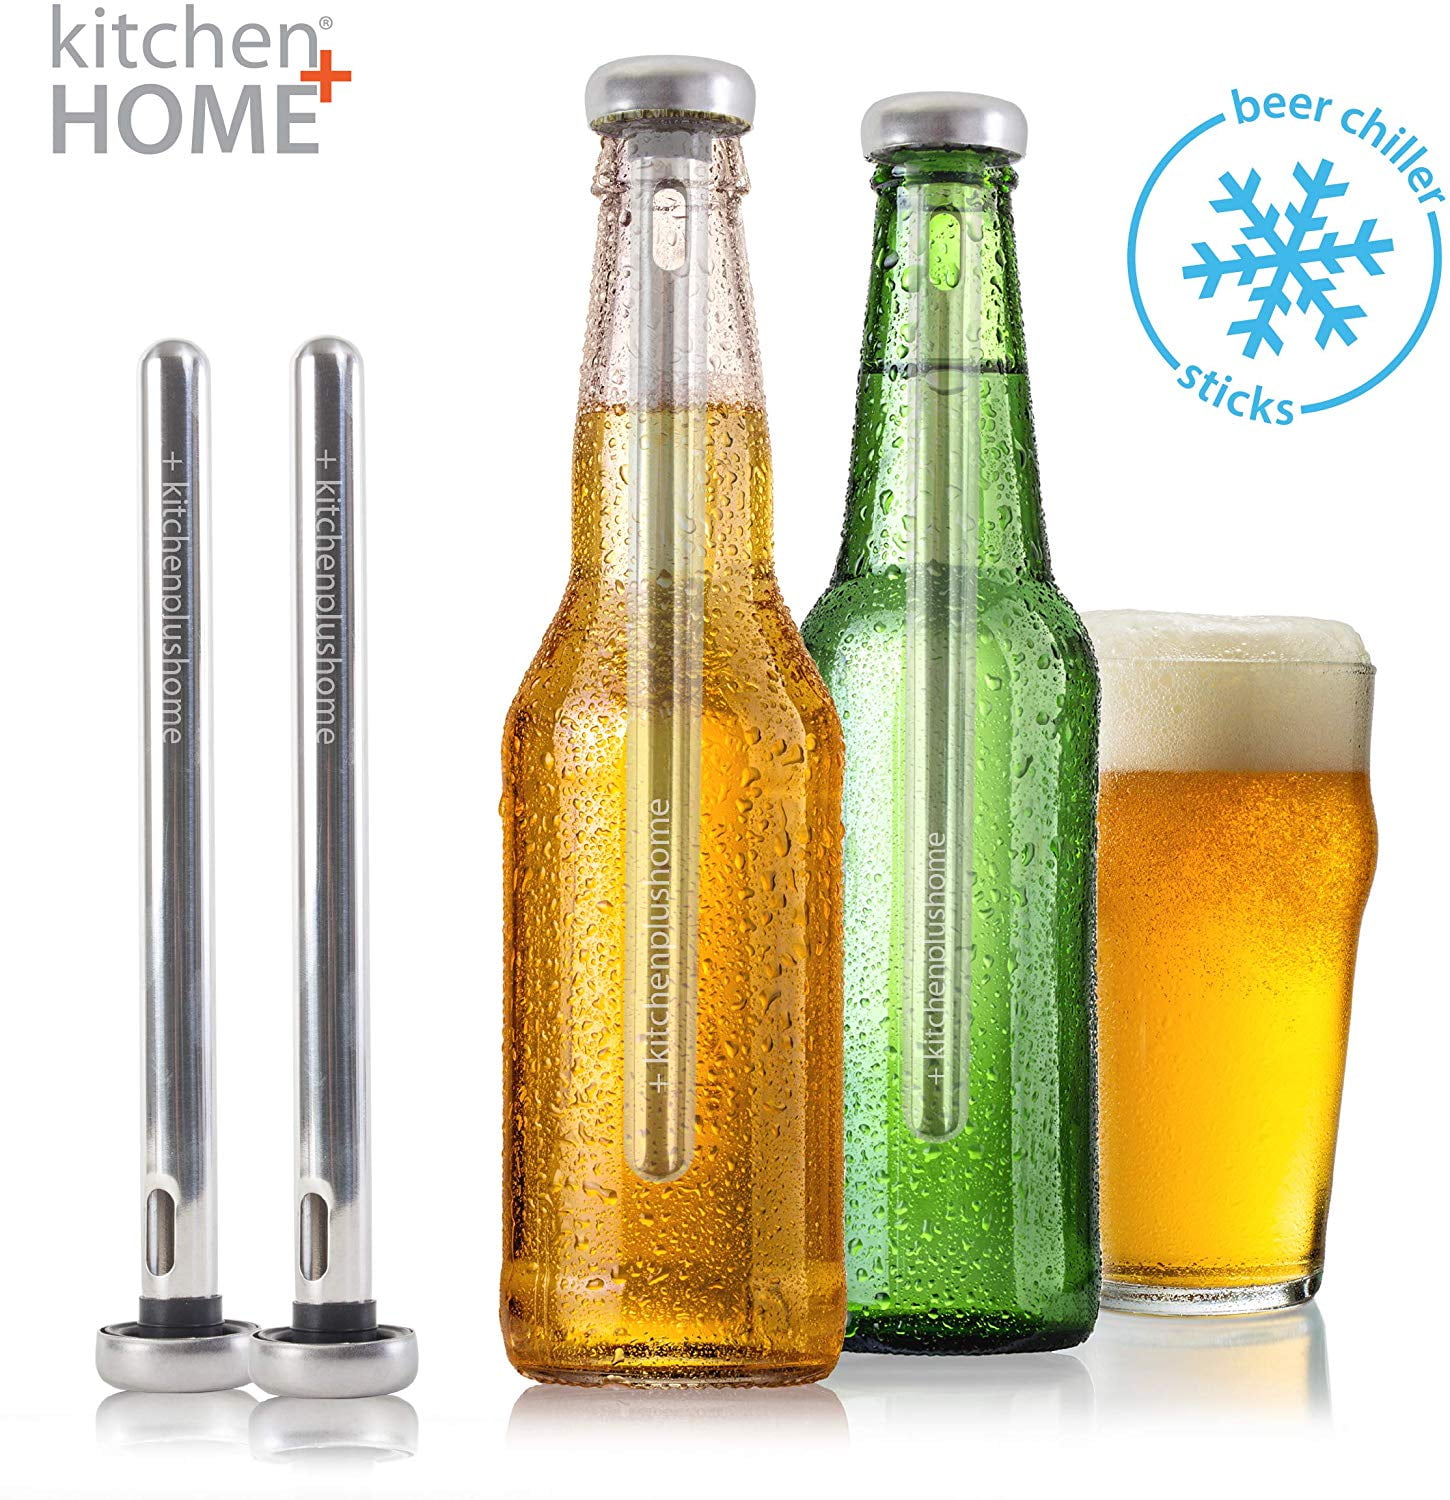 rongweiwang Portable Beer Cooler Ice Cold Wine Cooling Stick Stainless Steel Beverage Drinking Chiller 